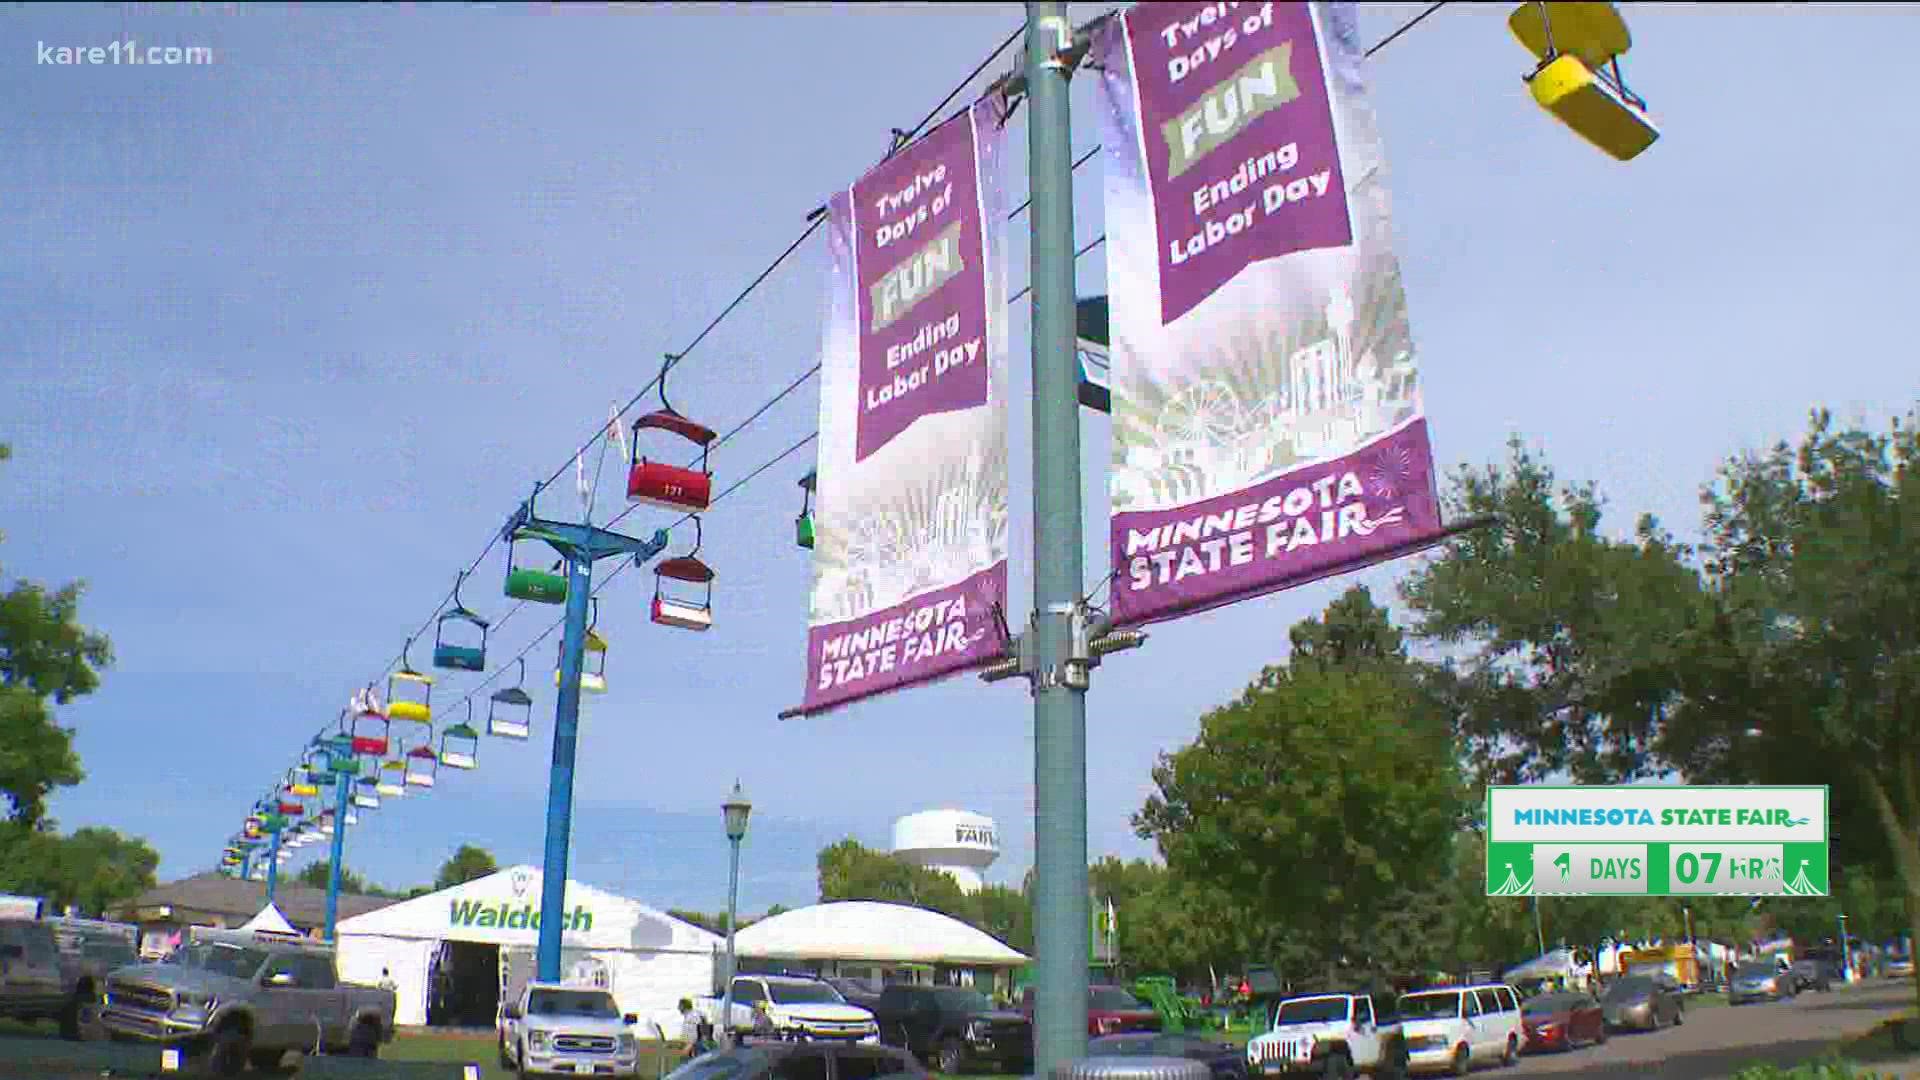 Fair officials say 150 vendors have pulled out over the past year for a number of reasons, but that 70 new ones have also been added.